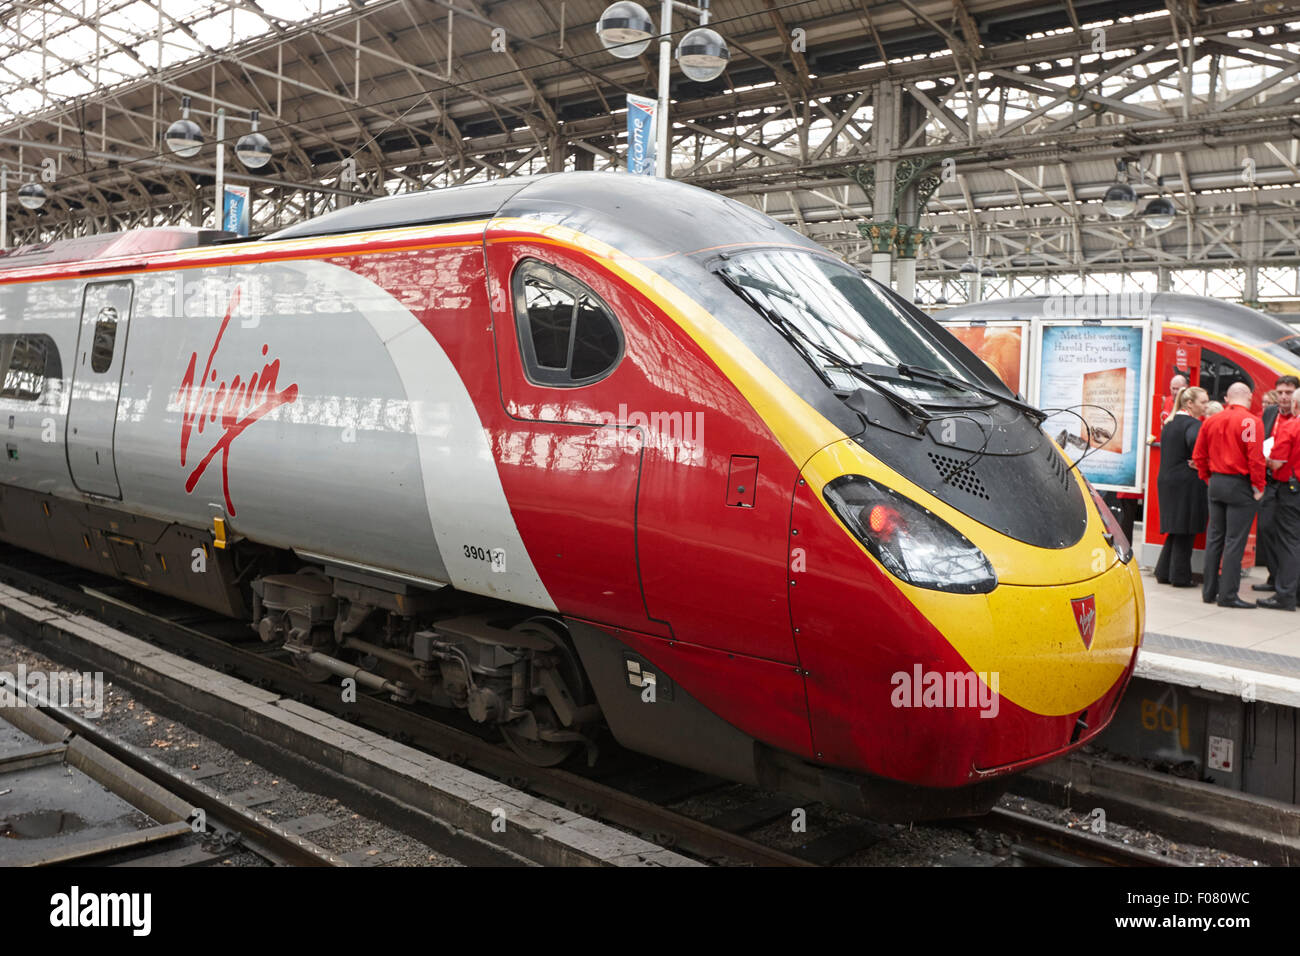 virgin trains 390137 pendolino train at Piccadilly train station Manchester UK Stock Photo